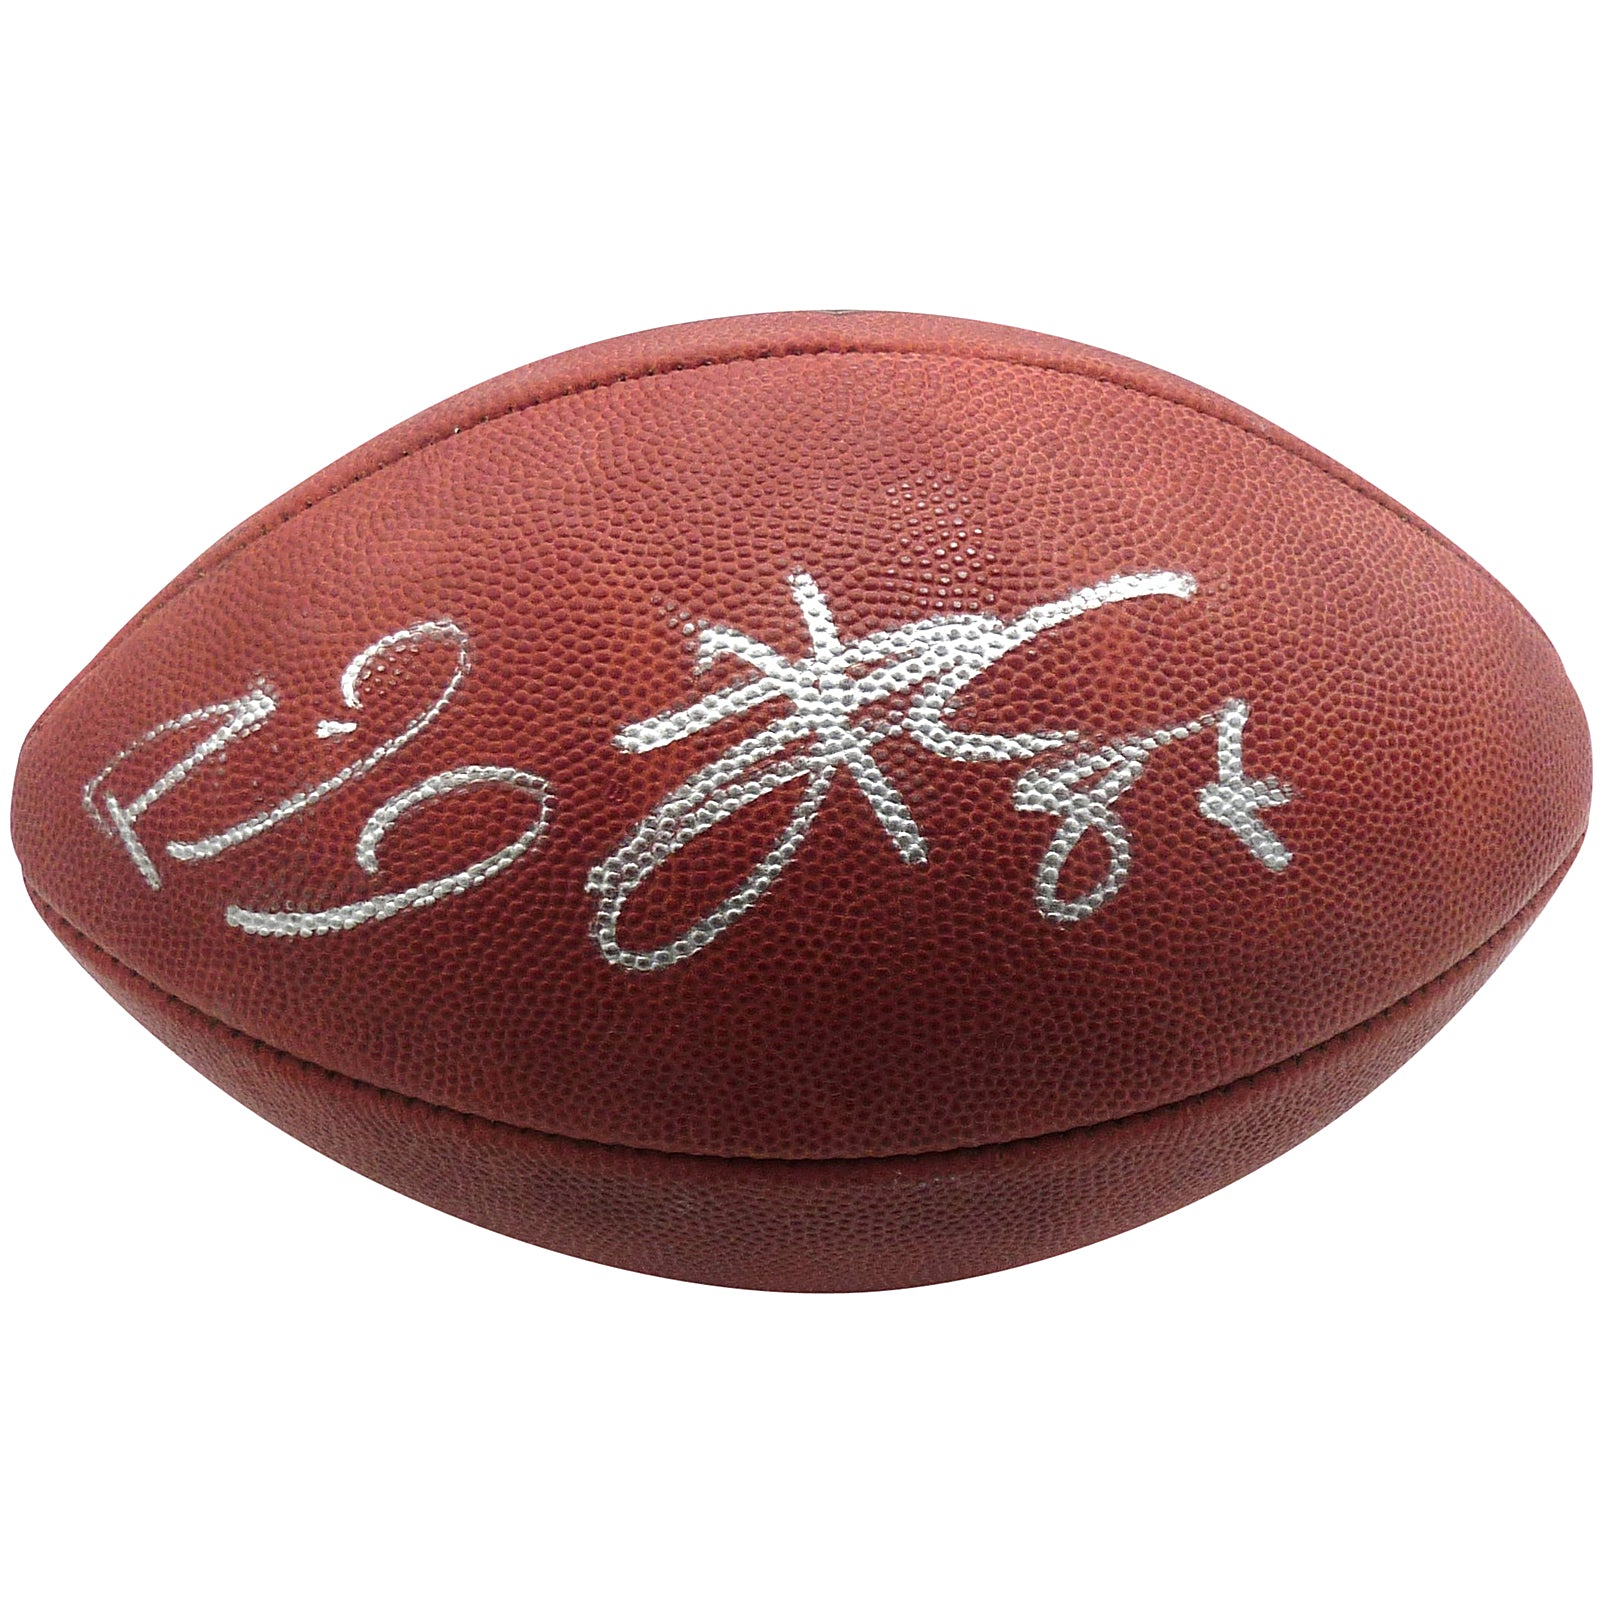 Patrick Mahomes And Travis Kelce Autographed Official NFL Game Football Kansas City Chiefs - Beckett